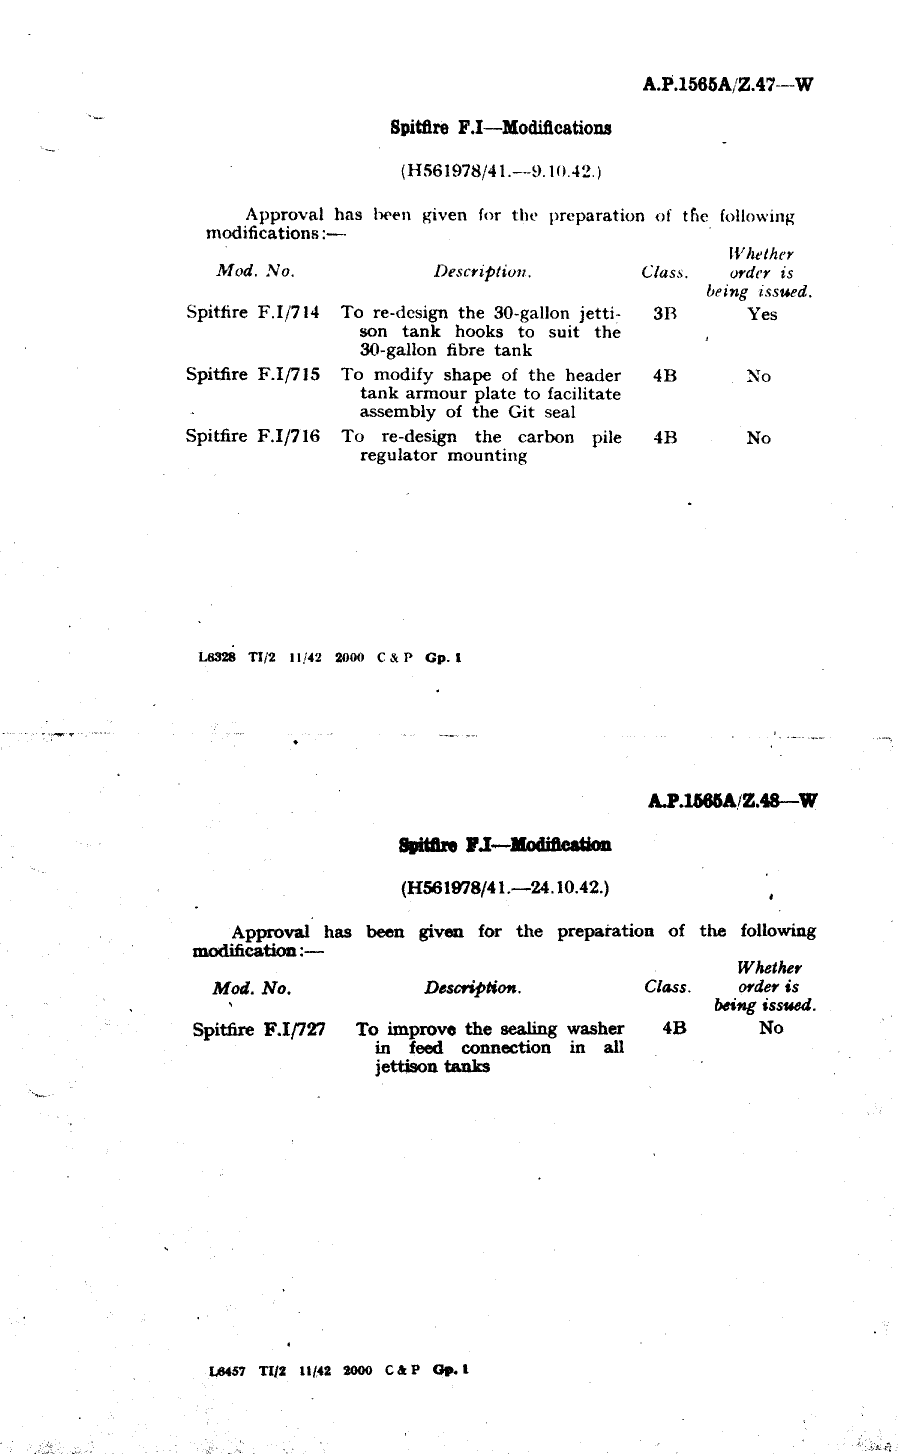 Sample page 1 from AirCorps Library document: Spitfire F.I Modifications 727